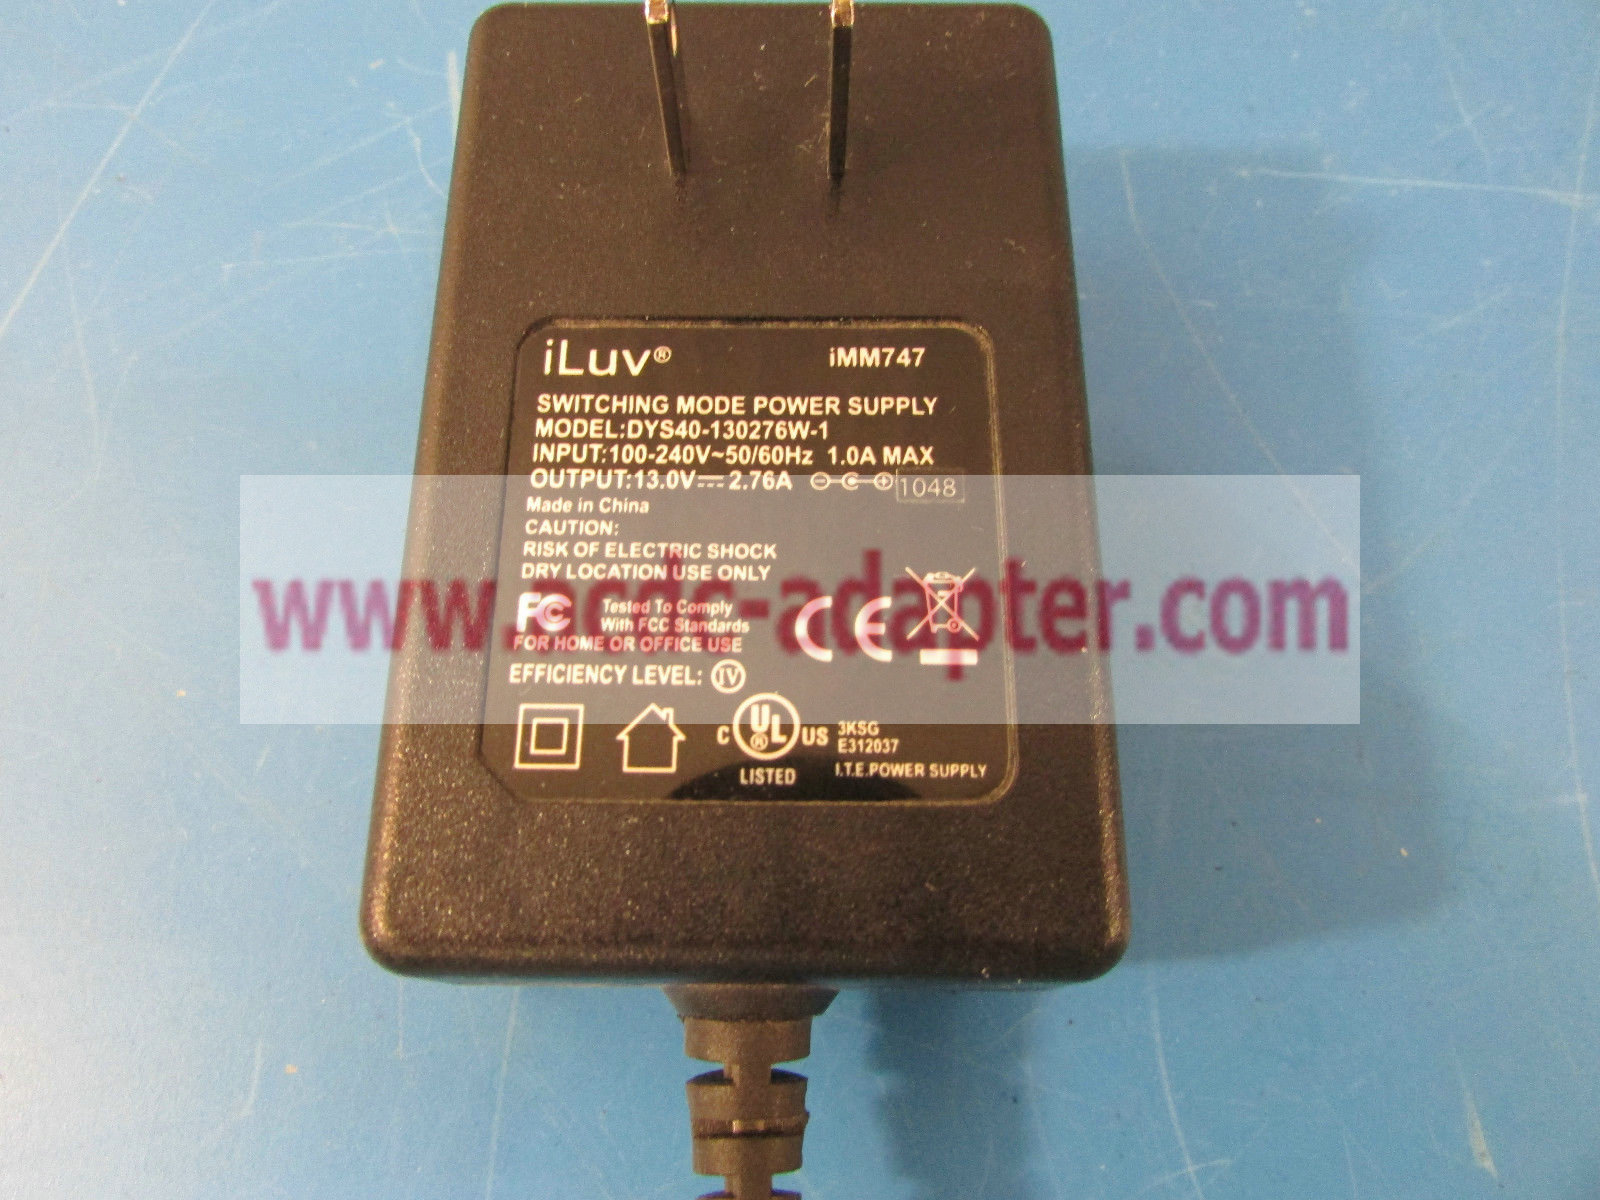 New iLuv DYS40-130276W-1 iMM747 13V 2.76A AC/DC Switching Power Supply Adapter